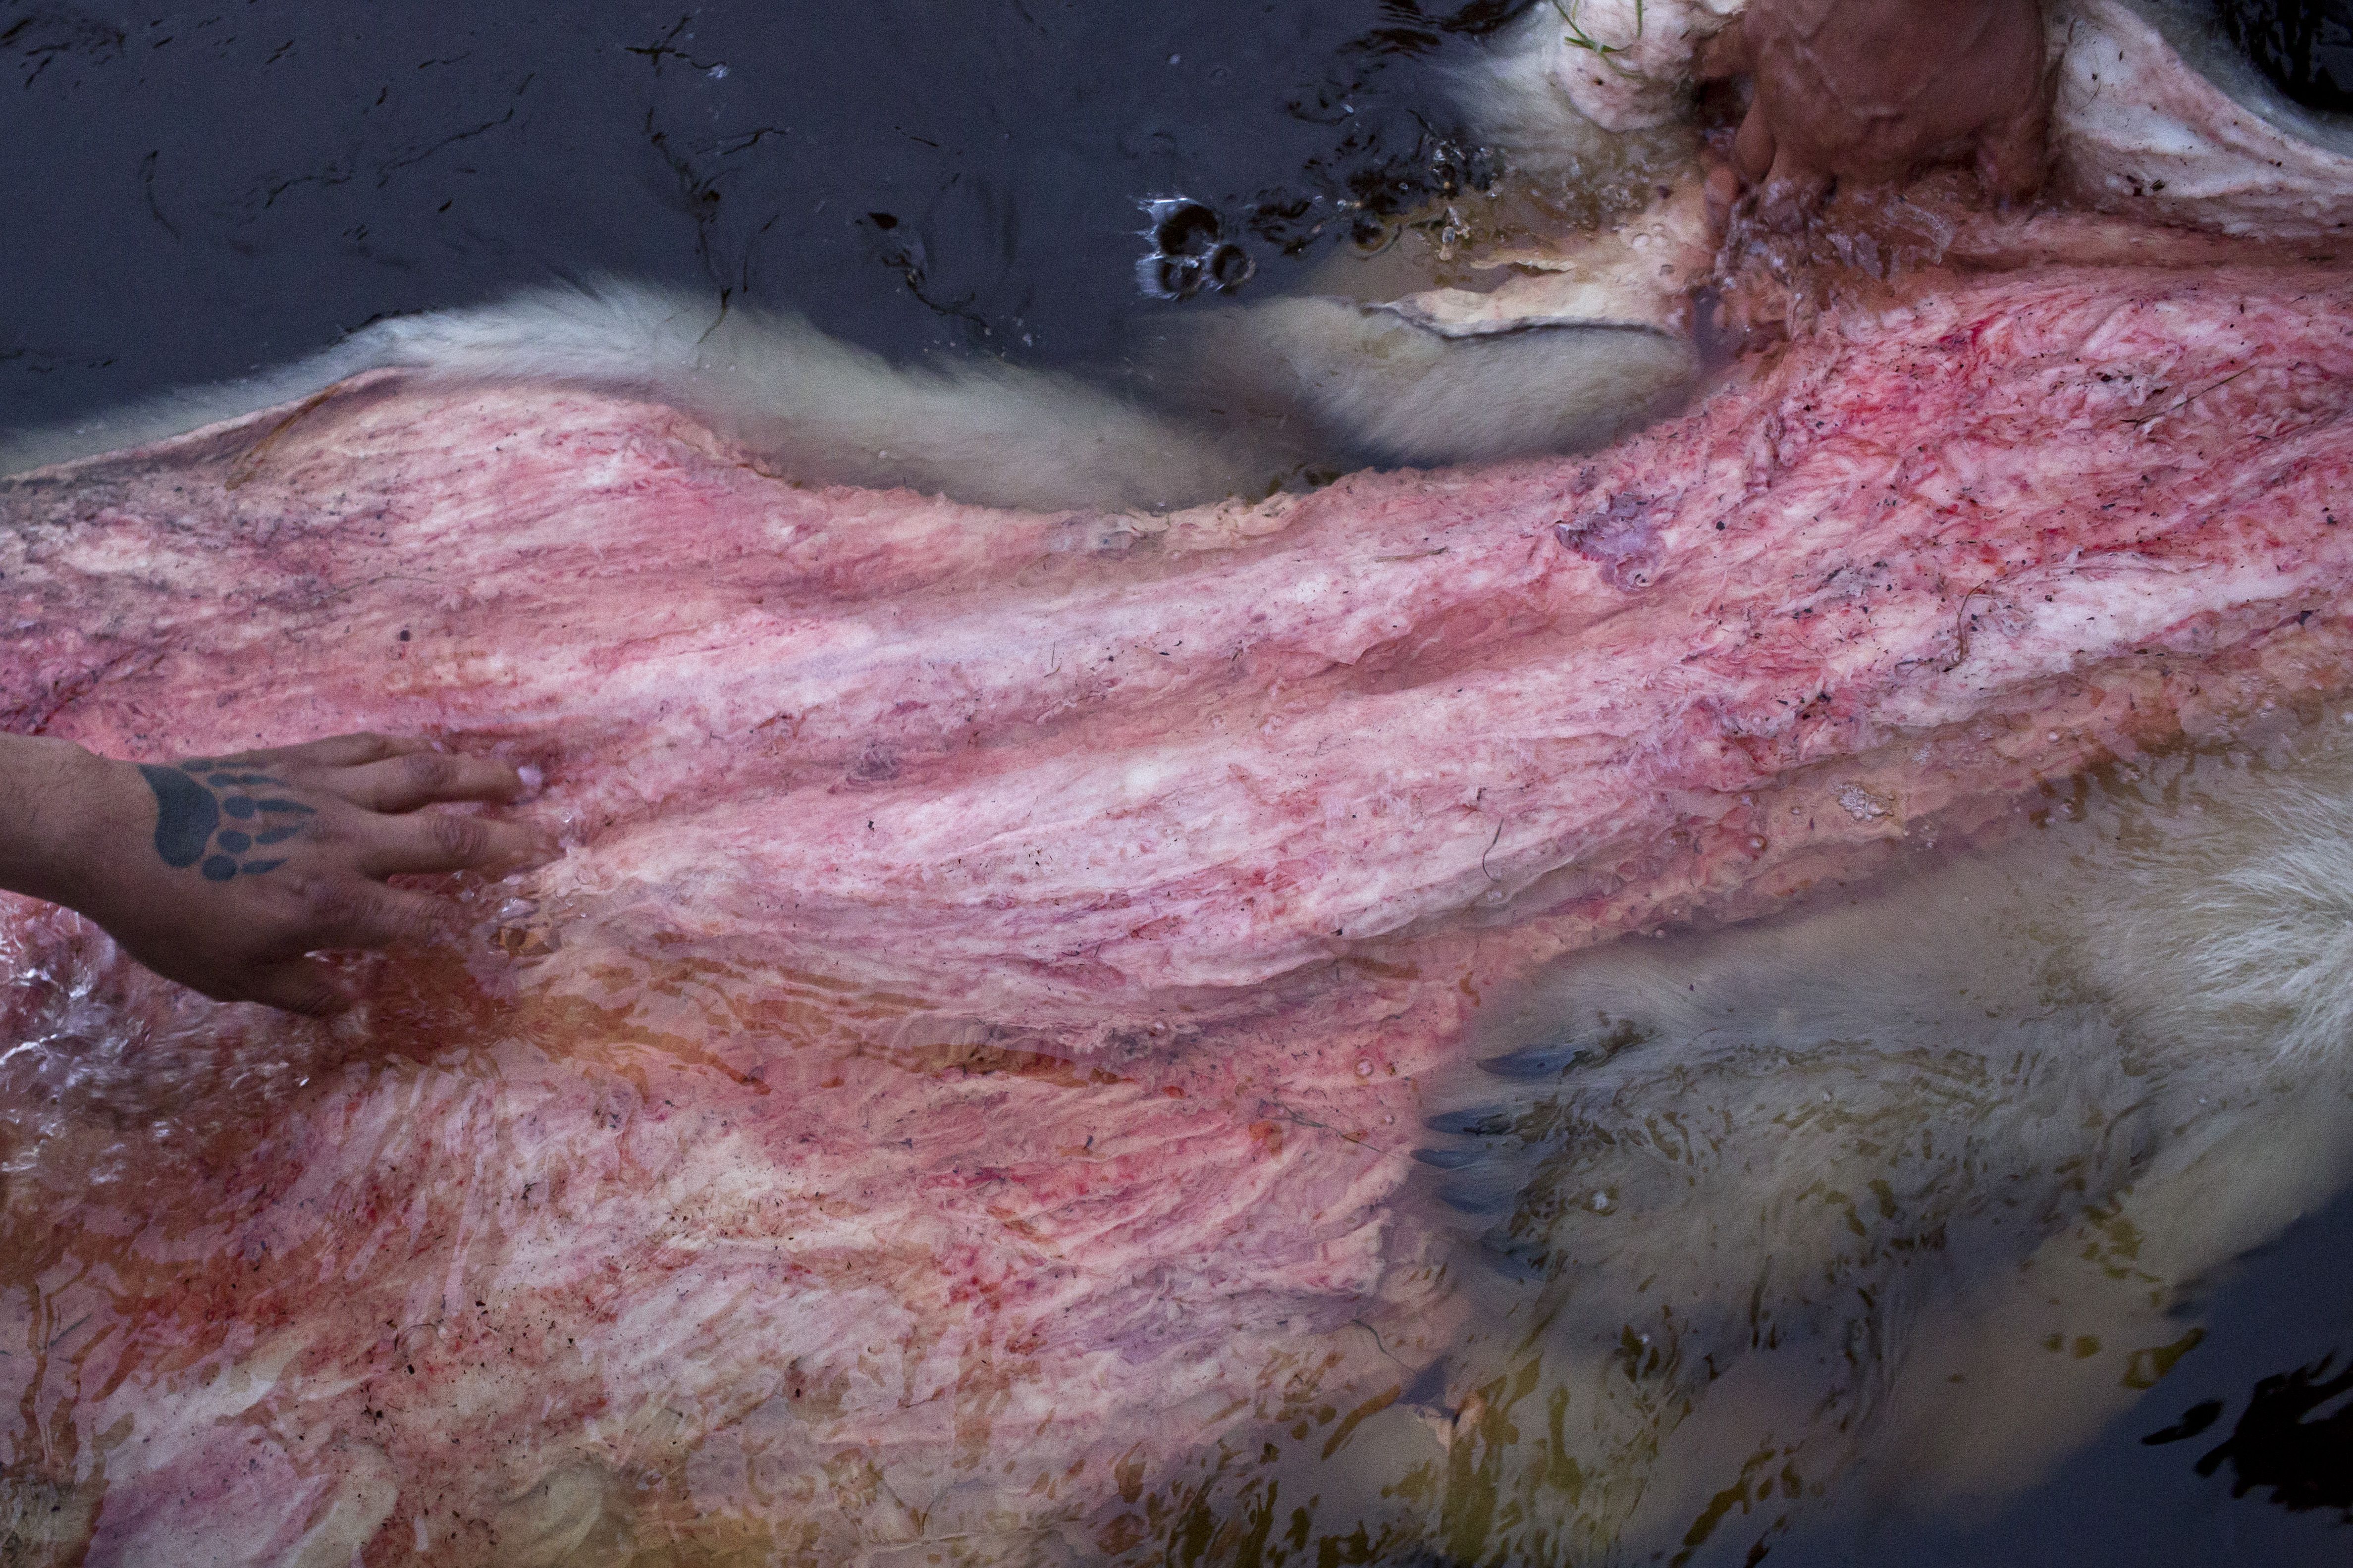 The pelt of a freshly skinned female polar bear is washed in the shallows of the Attawapiskat river. The bear was shot only hours earlier, when it charged a local man at a fishing camp on the outskirts of town. While the meat is only eaten in times of dire need, the fat was harvested to be used in traditional medicines. The expertise with which Cree woman Marietta Mattinas skinned and prepared the pelt was impressive, a skill she learned from her elders. Her nephew Xavier Wheesk (with the bear paw tattoo) and her husband Joseph are the ones preparing the pelt in the image, making it a family affair. Image by David Maurice Smith. Canada, 2016.